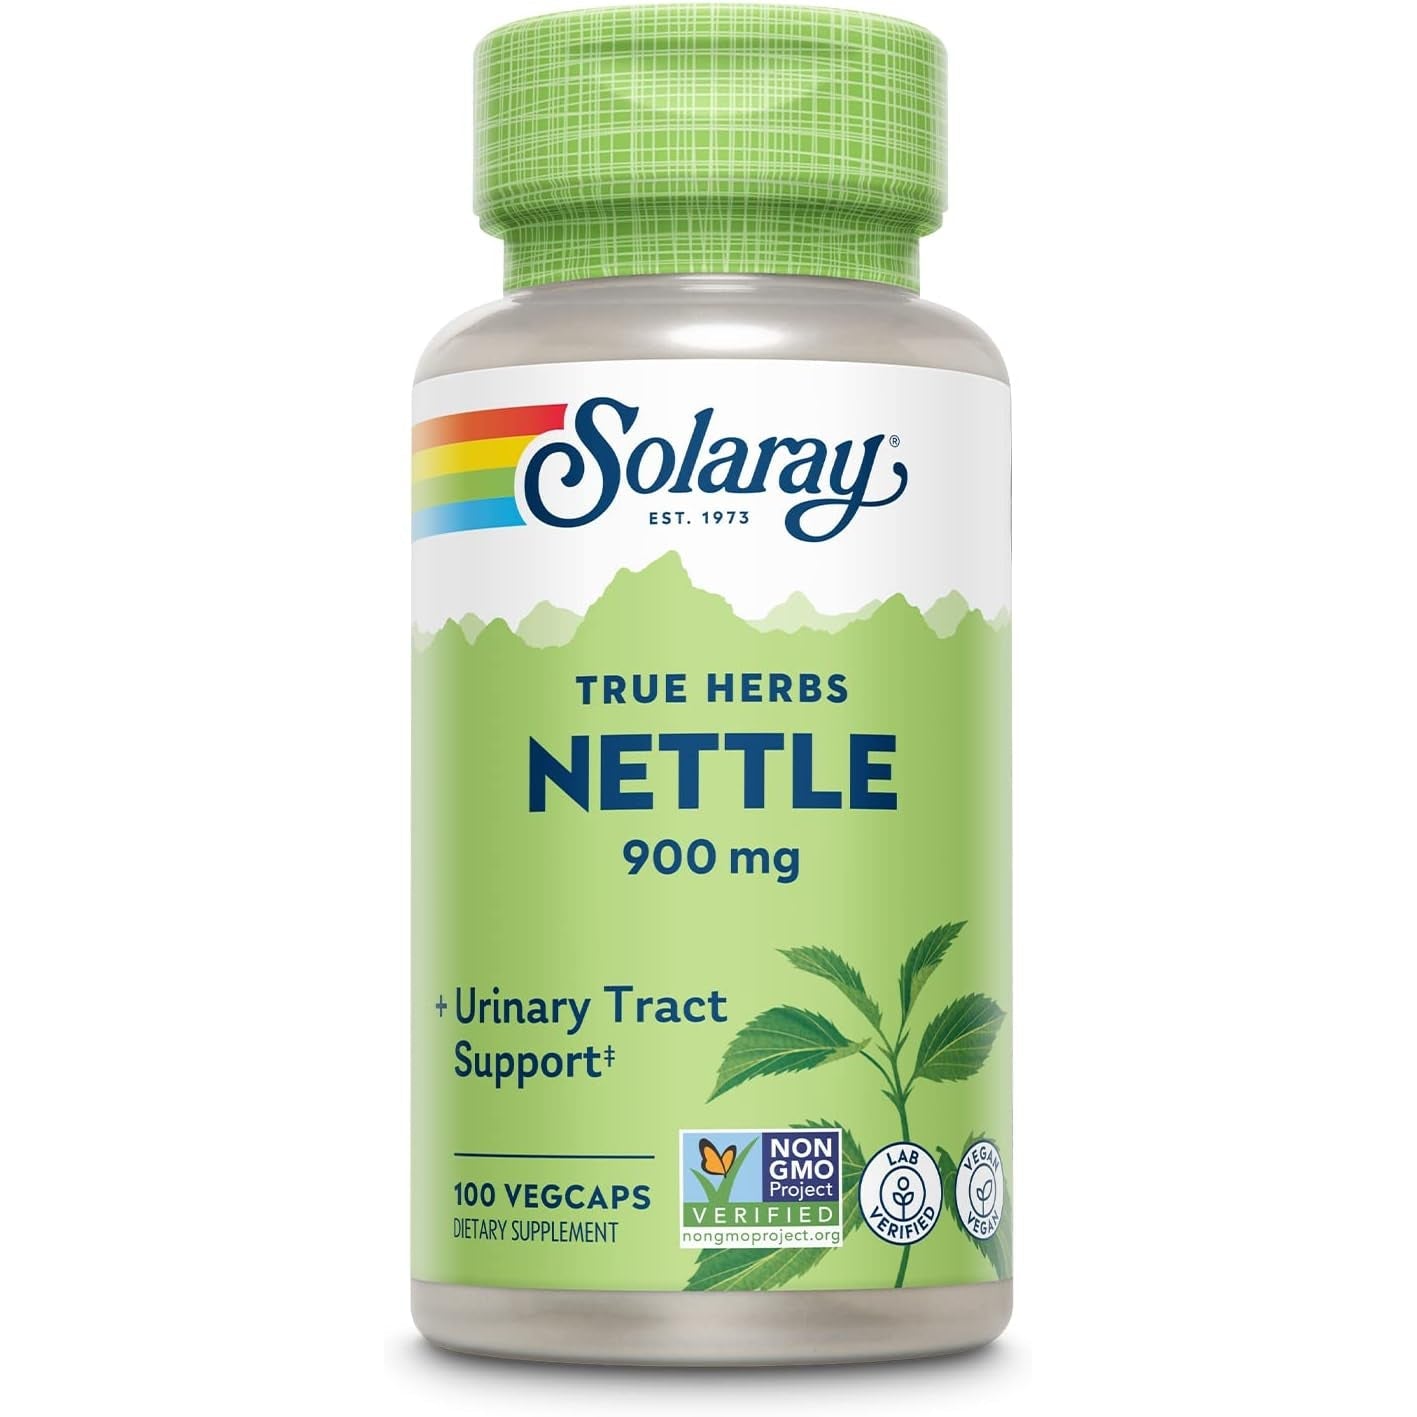 Solaray Nettle Leaf Extract 900mg Urinary Tract Support Vegan 100 Vegetable Capsules